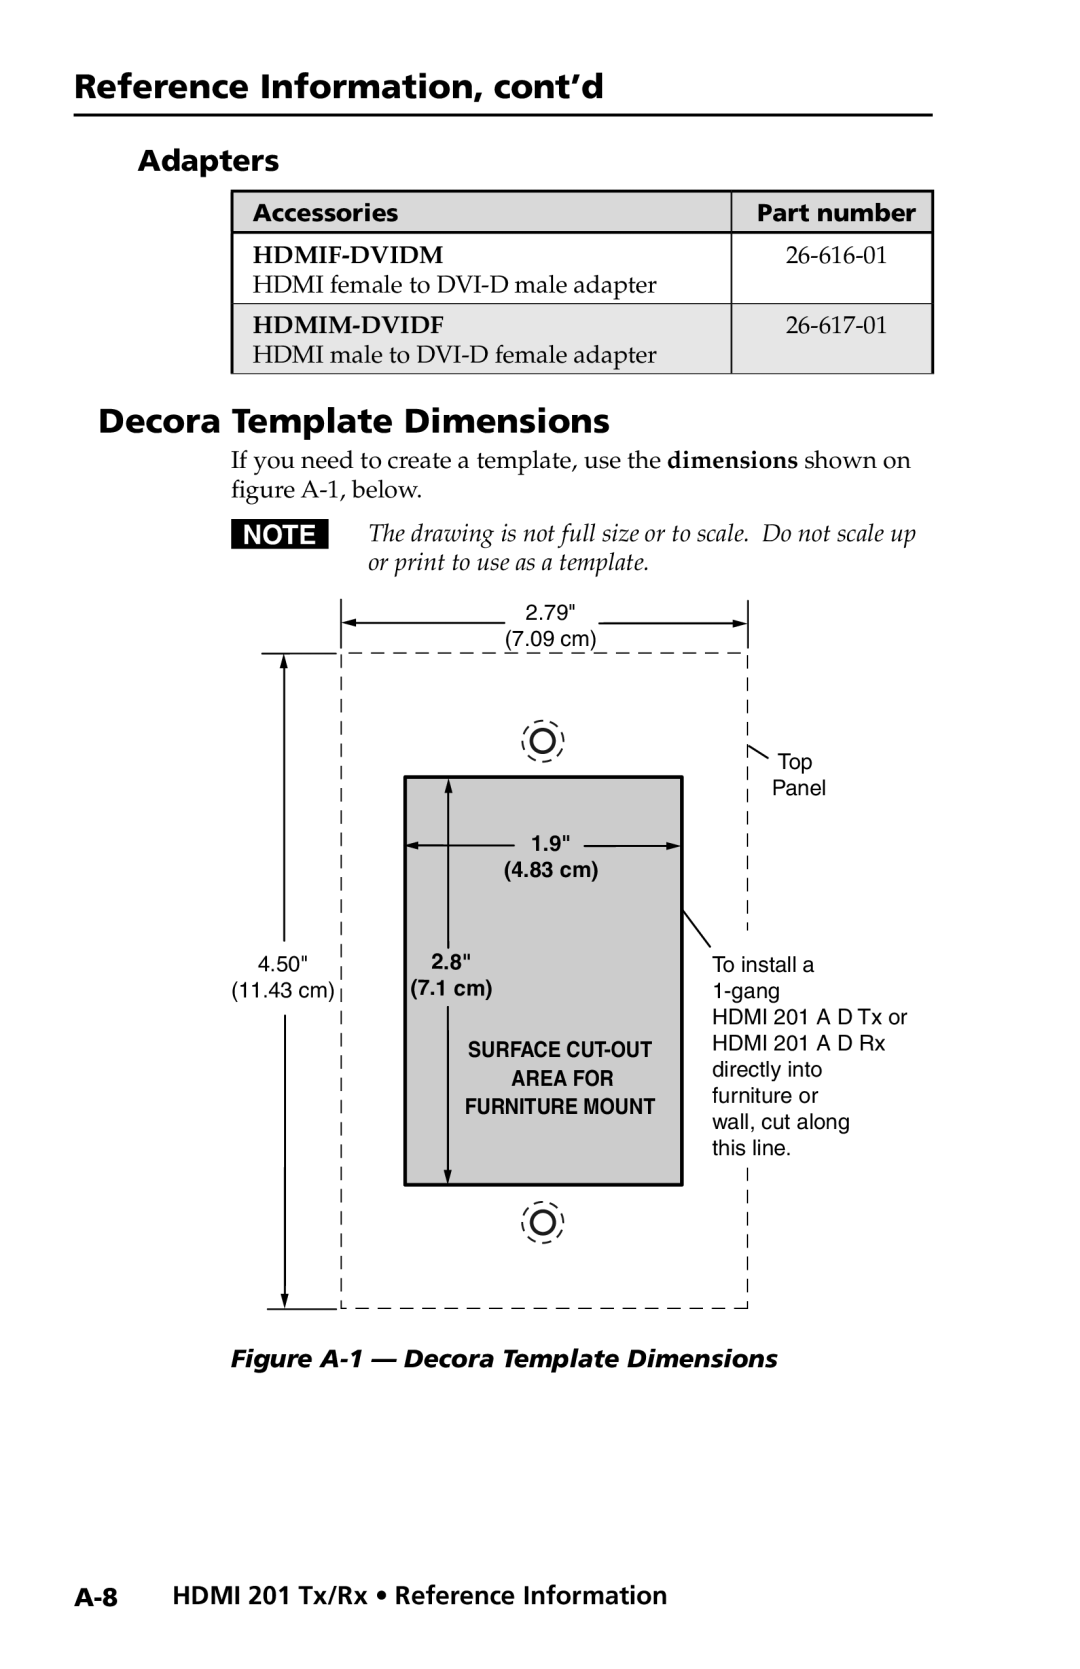 Extron electronic user manual Decora Template Dimensions, Adapters, A-8HDMI 201 Tx/Rx Reference Information, Accessories 